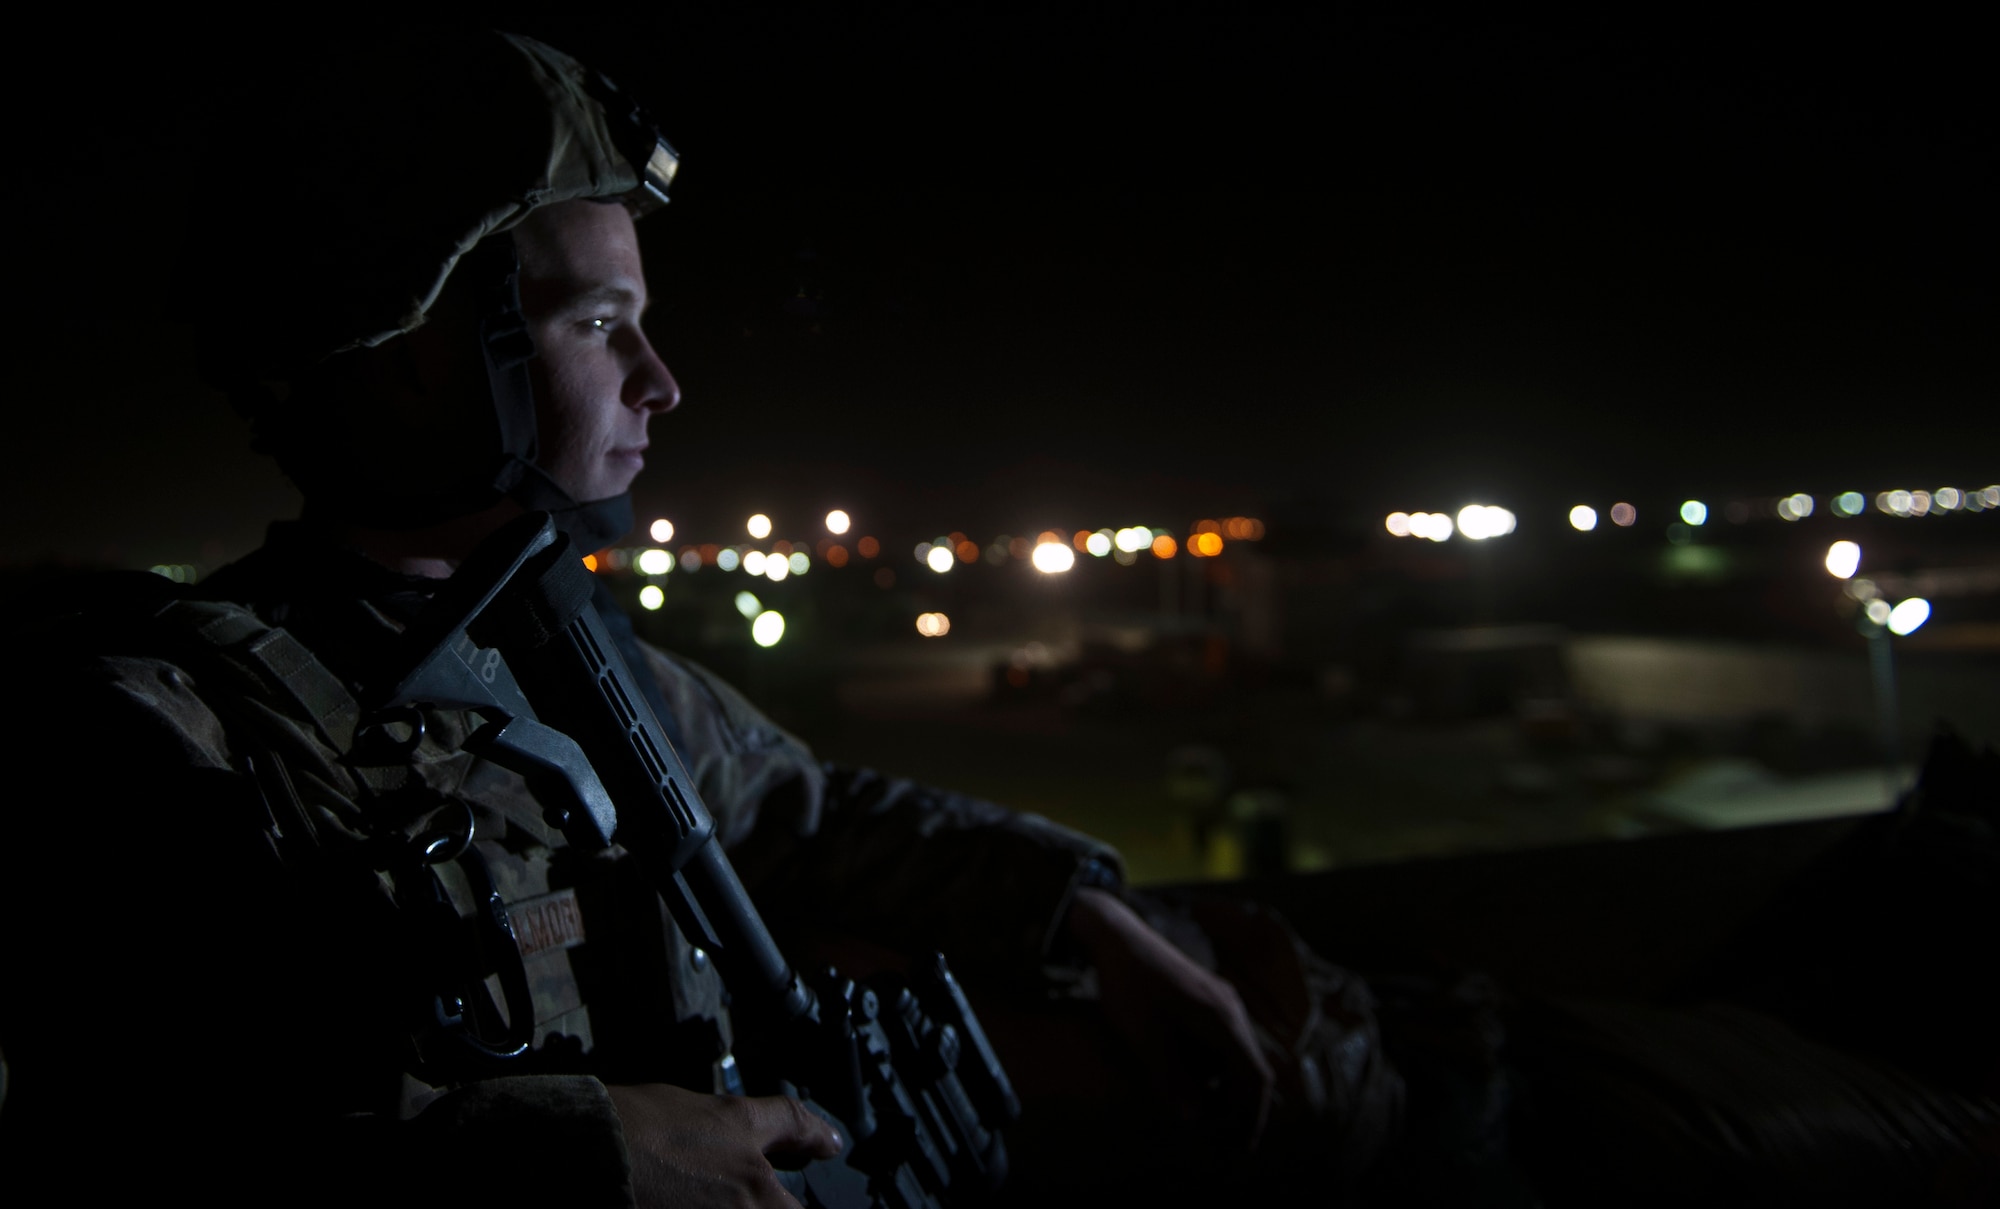 An Airman deployed with the 455th Expeditionary Security Forces Squadron monitors an entry control point at Bagram Airfield Afghanistan, Aug. 24, 2012. Bagram’s large size and vital mission make it a strategic target for insurgents seeking to demonstrate capability, which is why the Airmen from 455 ESFS remain ever-vigilant against the threat of enemy attacks. (U.S. Air Force Photo/Capt. Raymond Geoffroy)